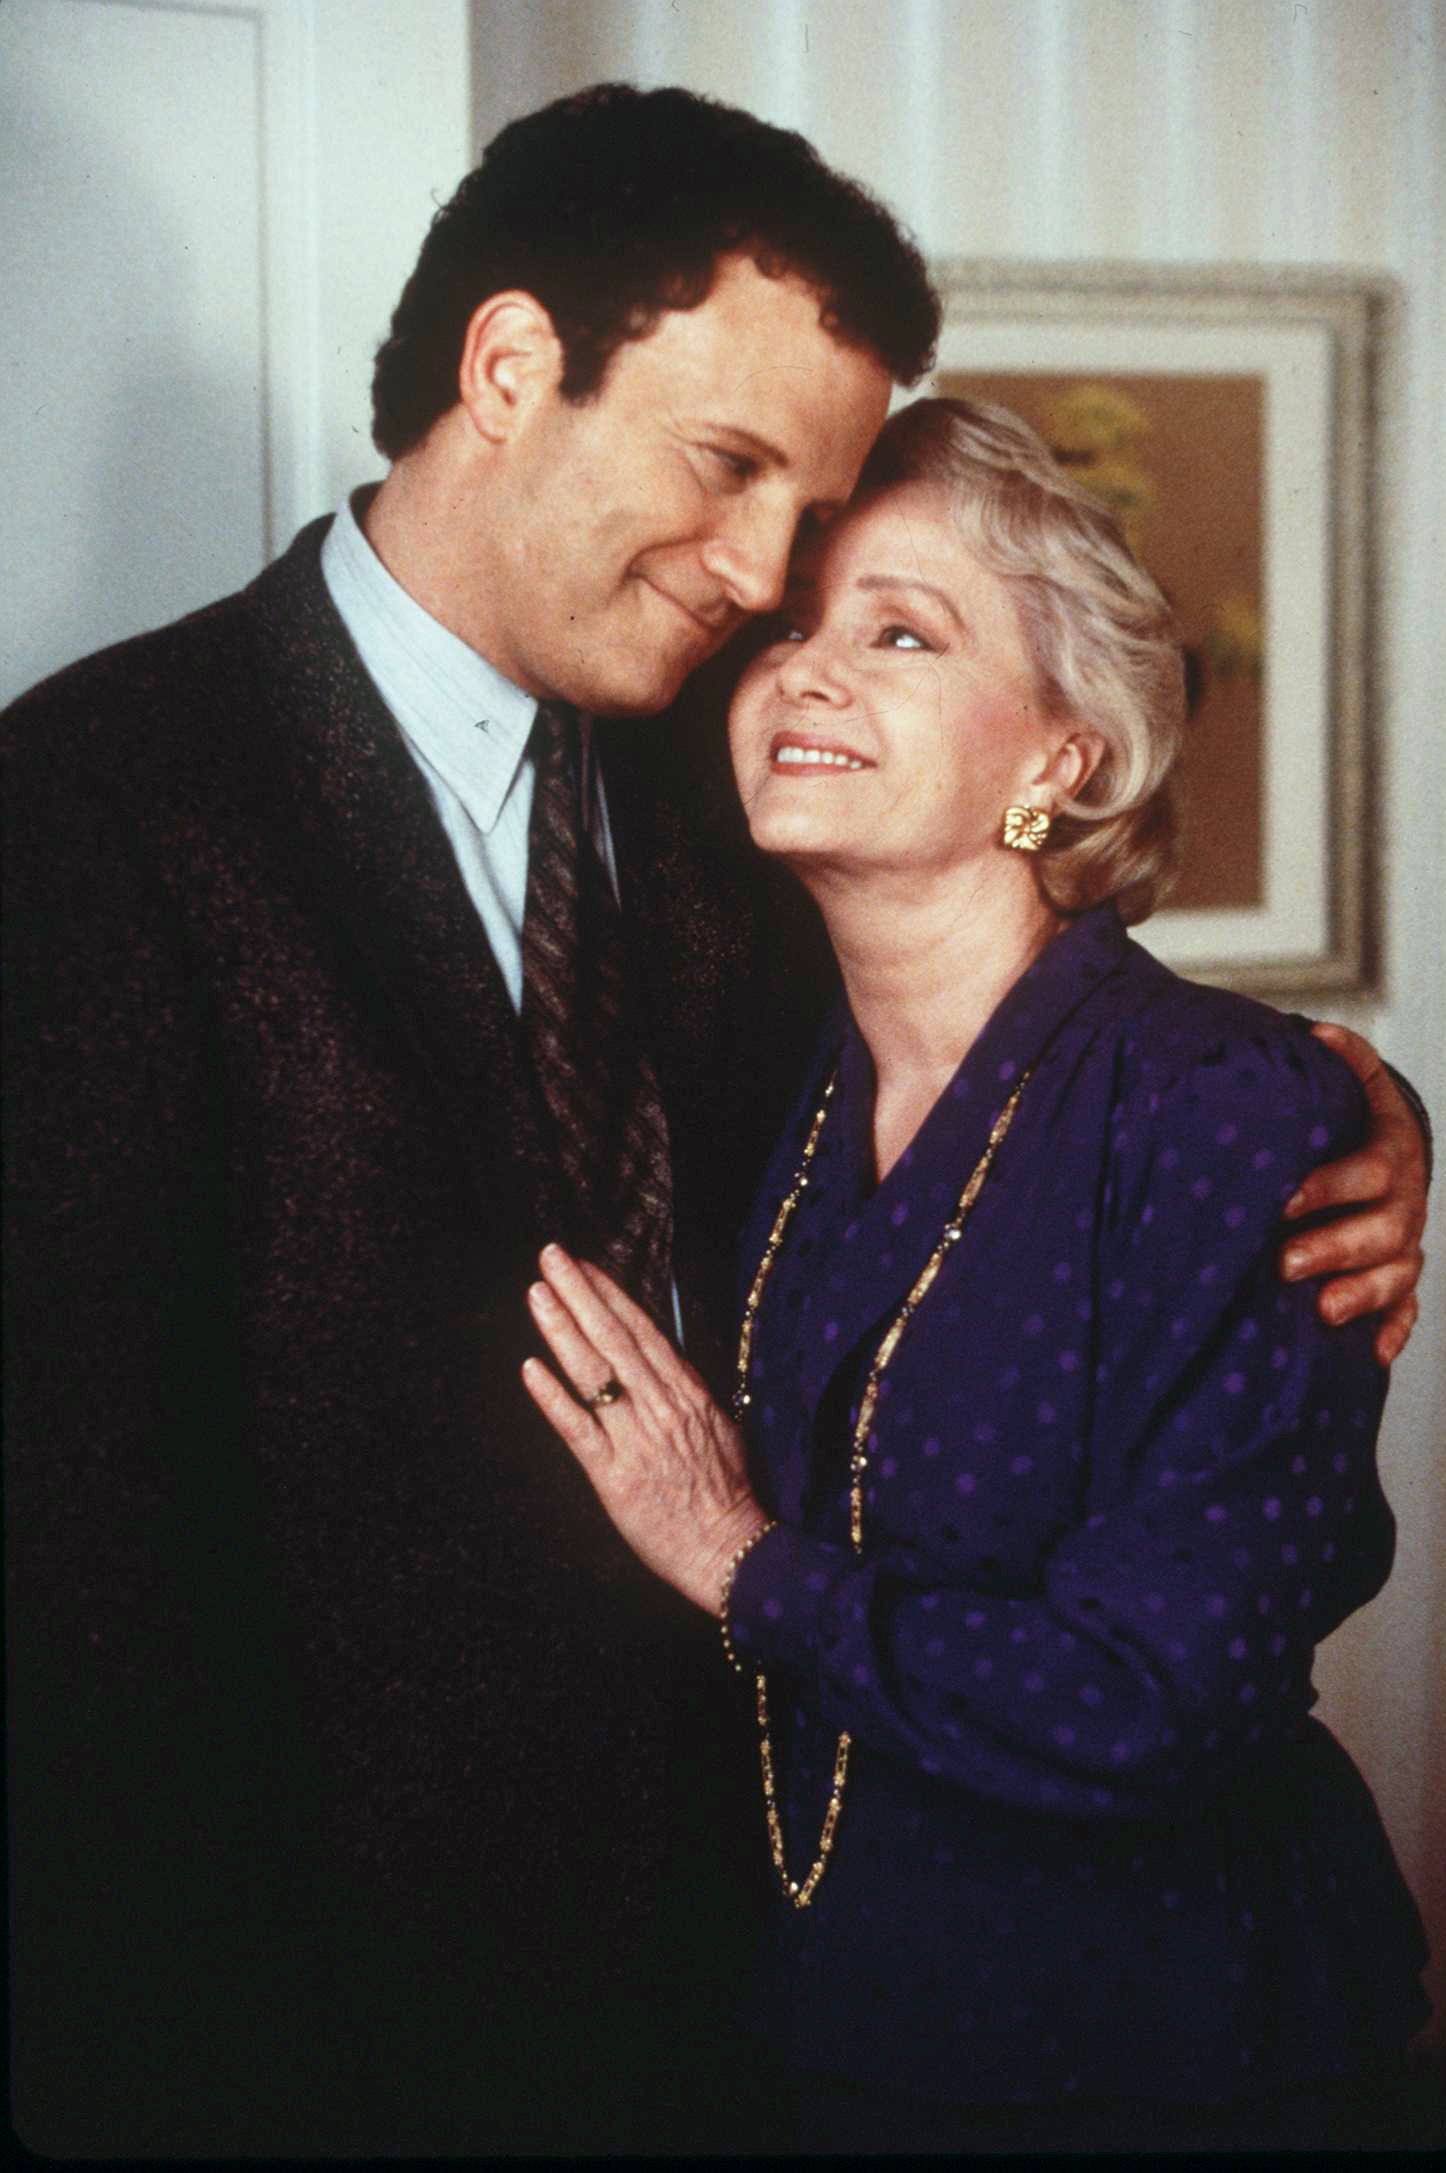 PHOTO: Albert Brooks and Debbie Reynolds in a scene from "Mother."